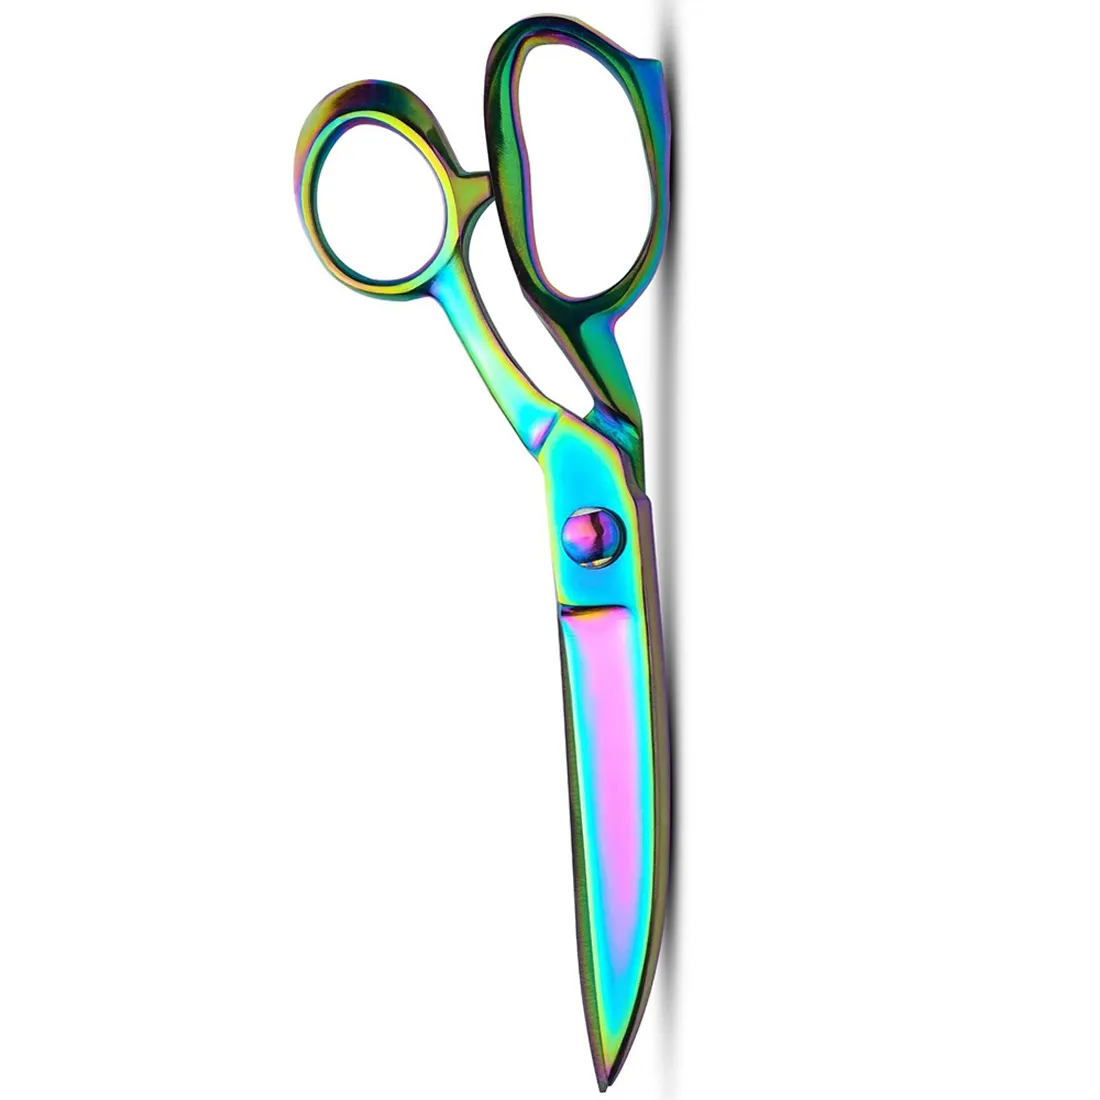 Multicoloured Fabric Tailor Scissors 11 German Stainless Steel Sharp Blades Cloths Sewing Shears Made Stainless Steel